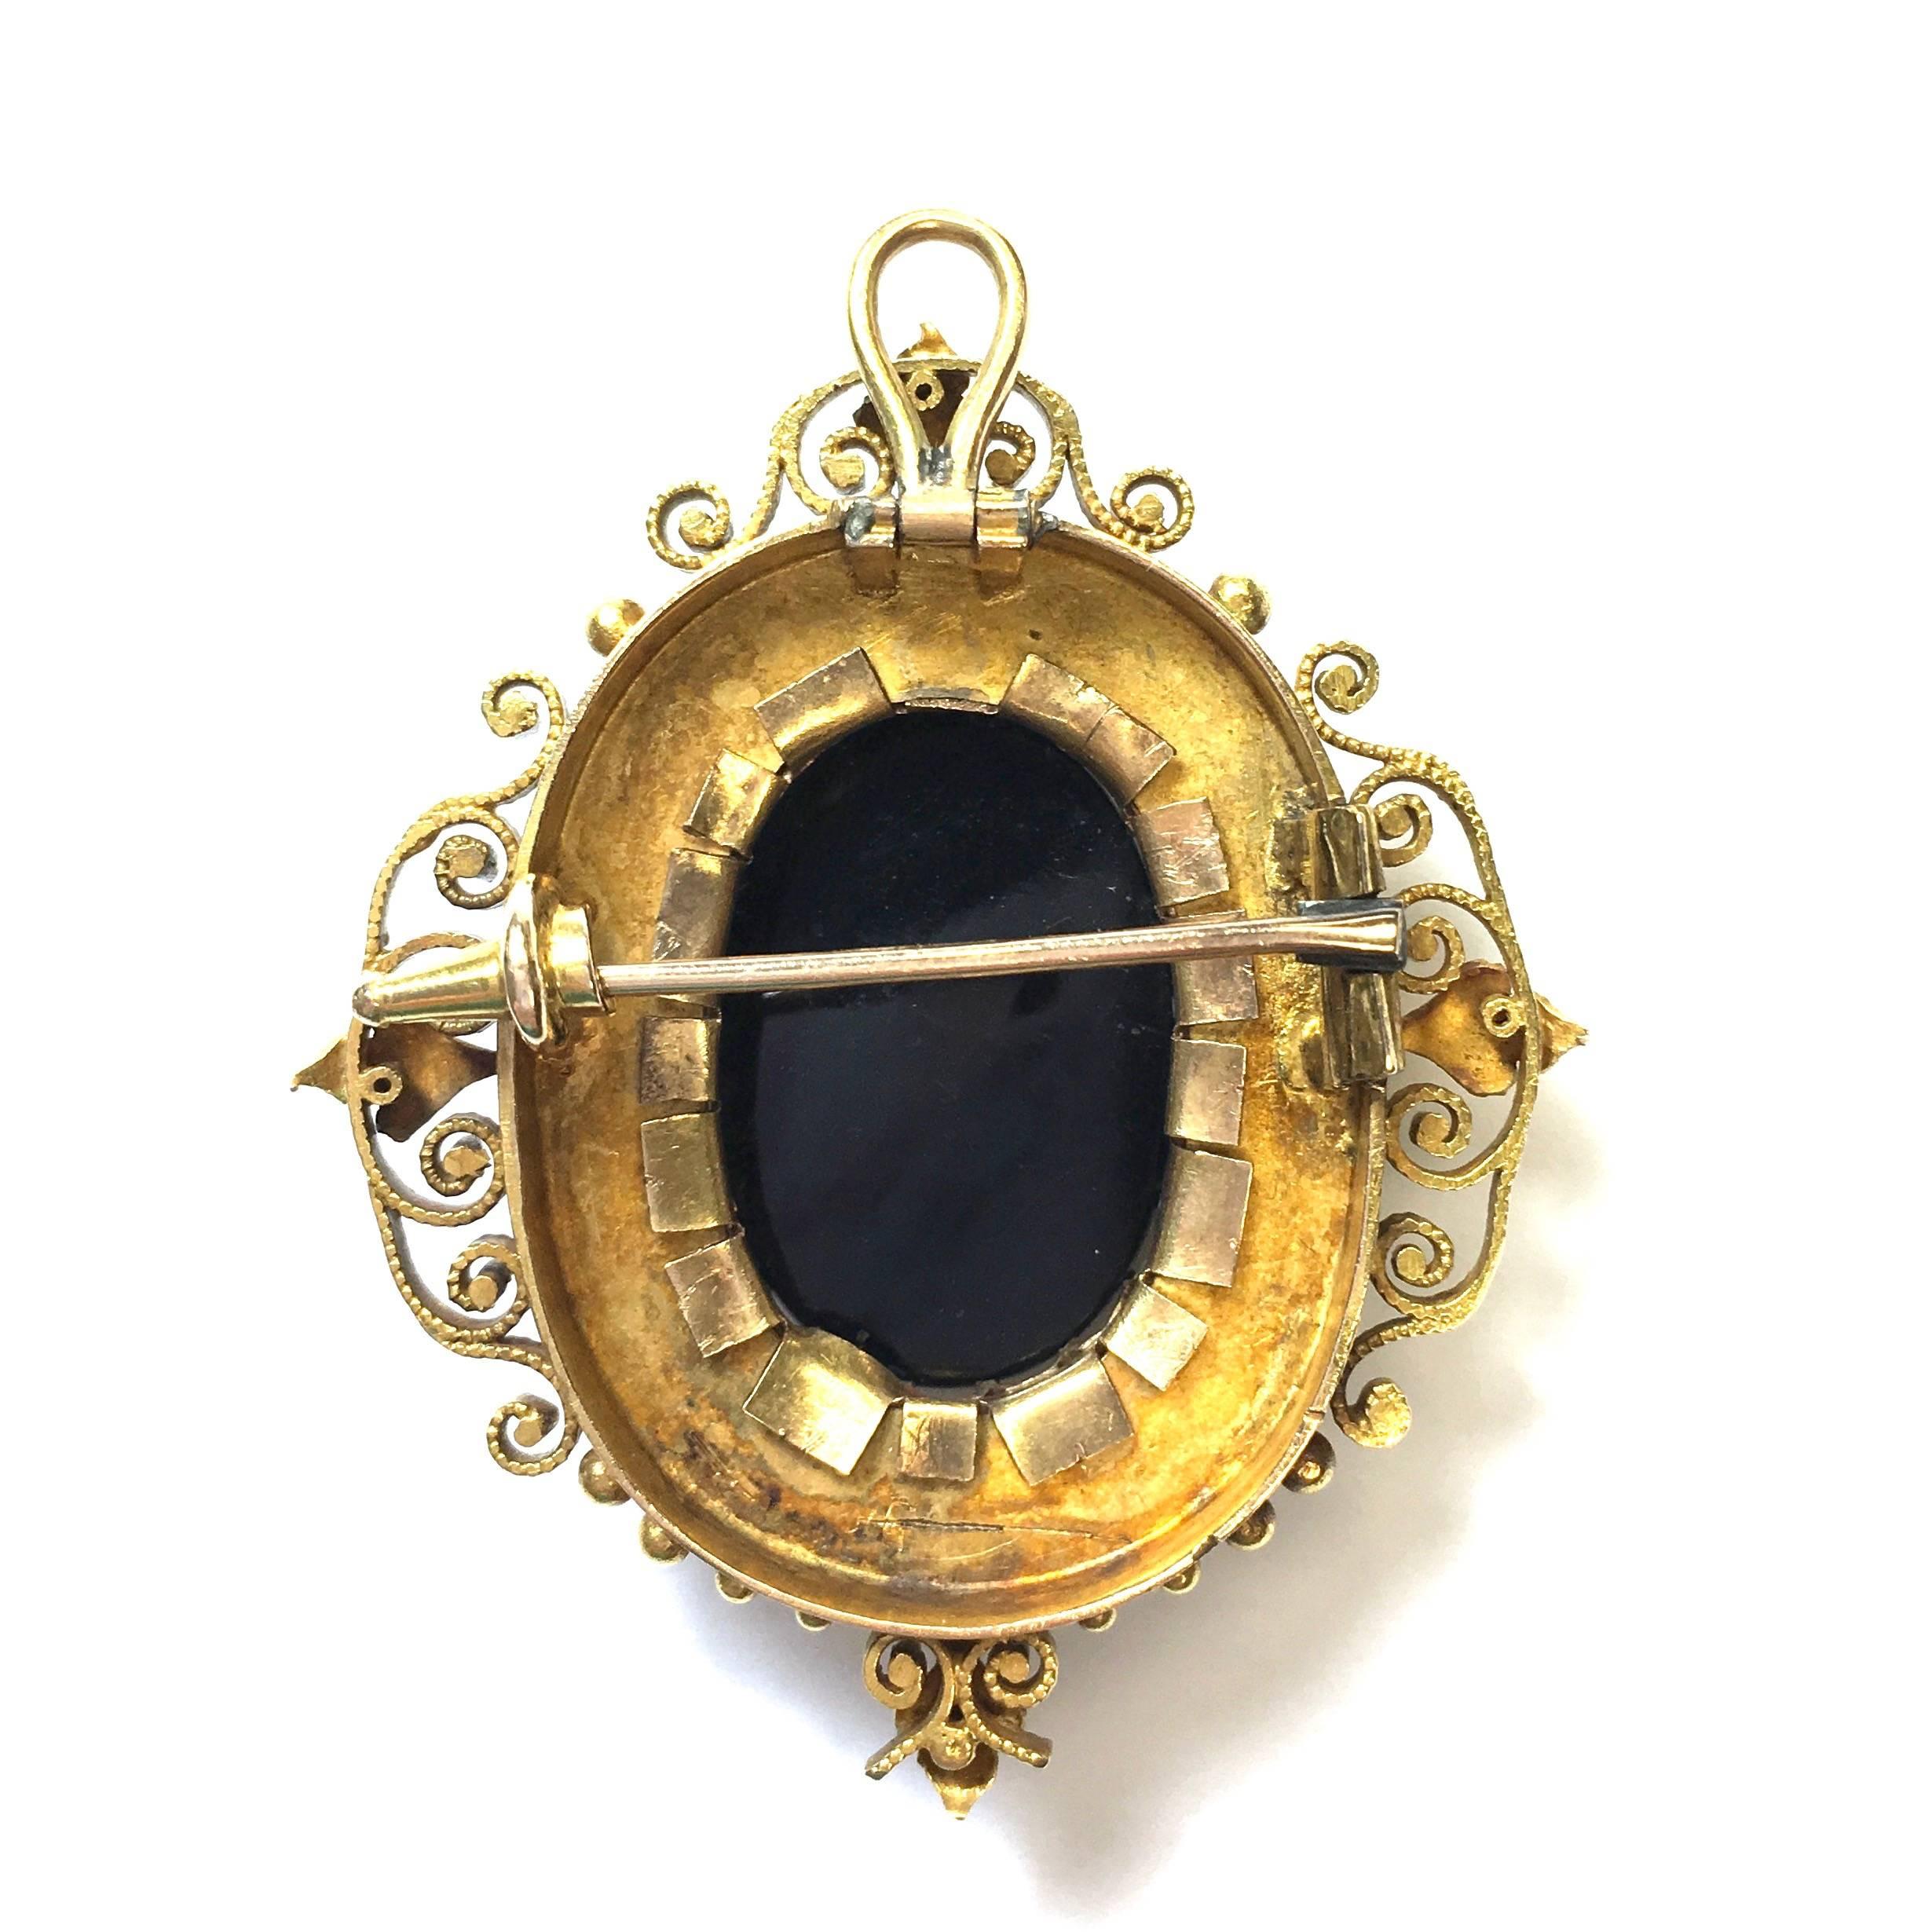 14K Yellow gold Victorian onyx cameo pendant/brooch and earrings set. The frames of the brooch and the earrings are decorated with scroll work and gold beads. The earrings have the original clip-on backings.
The pendant brooch measures: 2 1/16